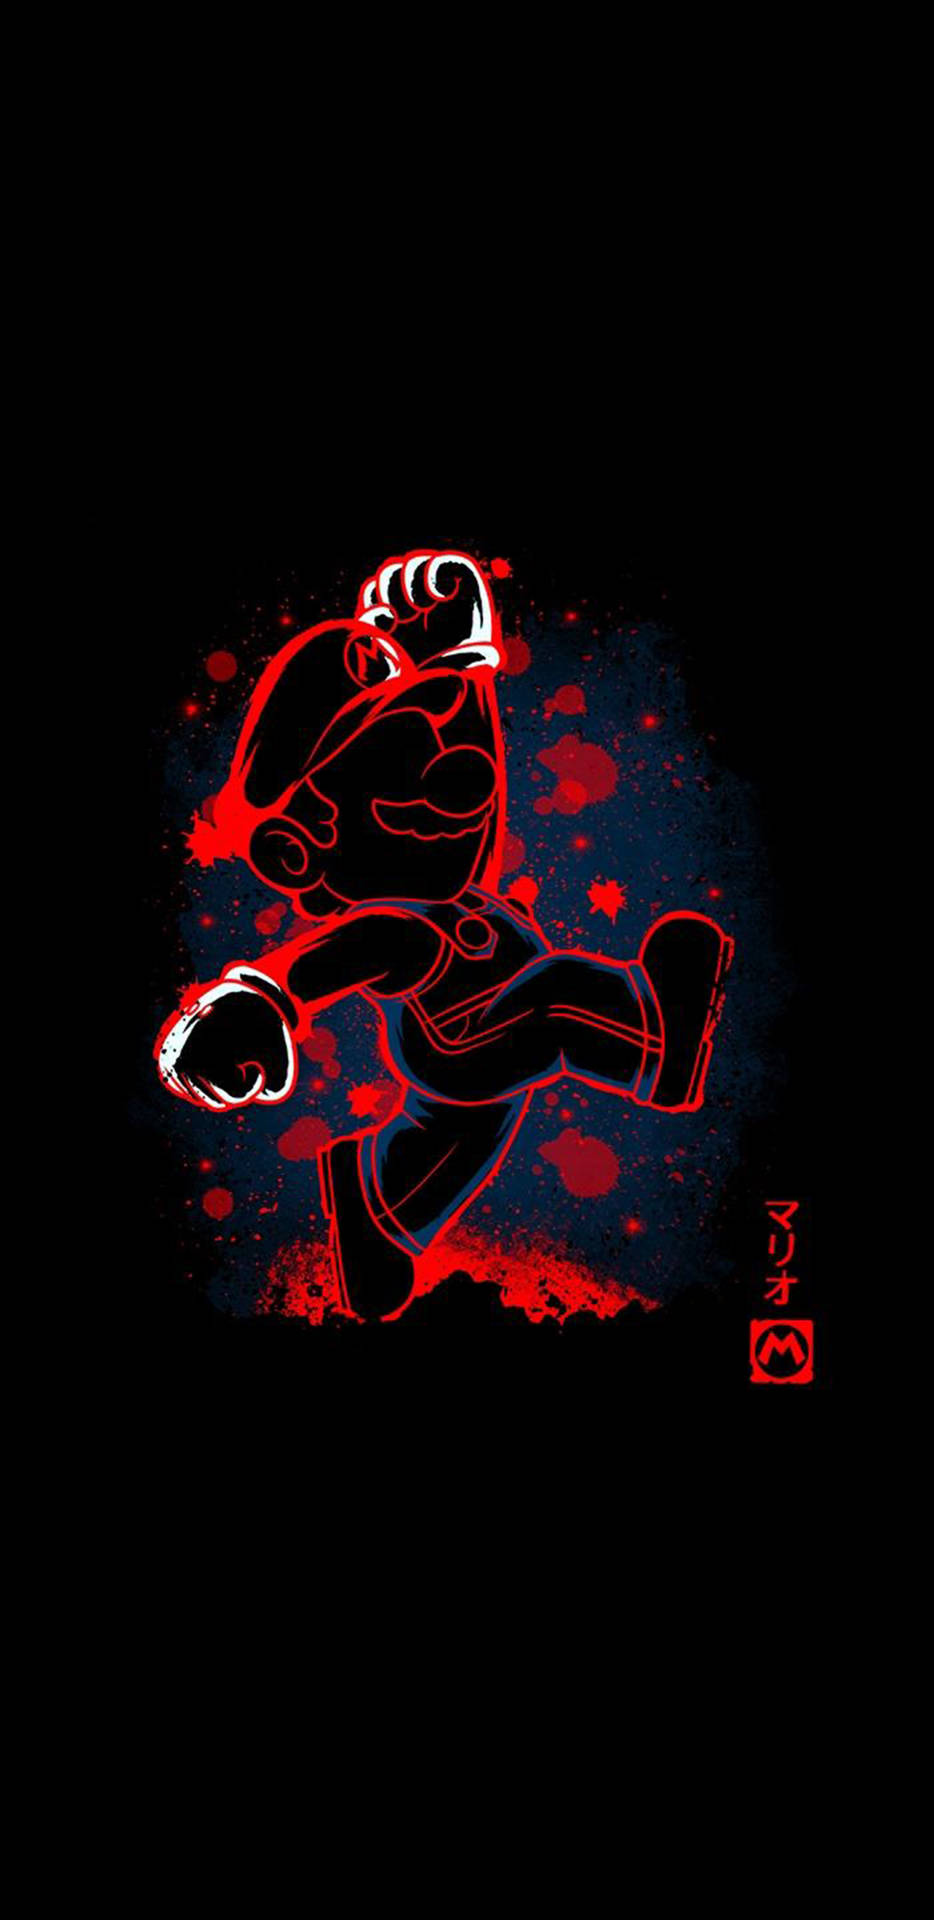 Super Mario outlined in Amoled Wallpaper